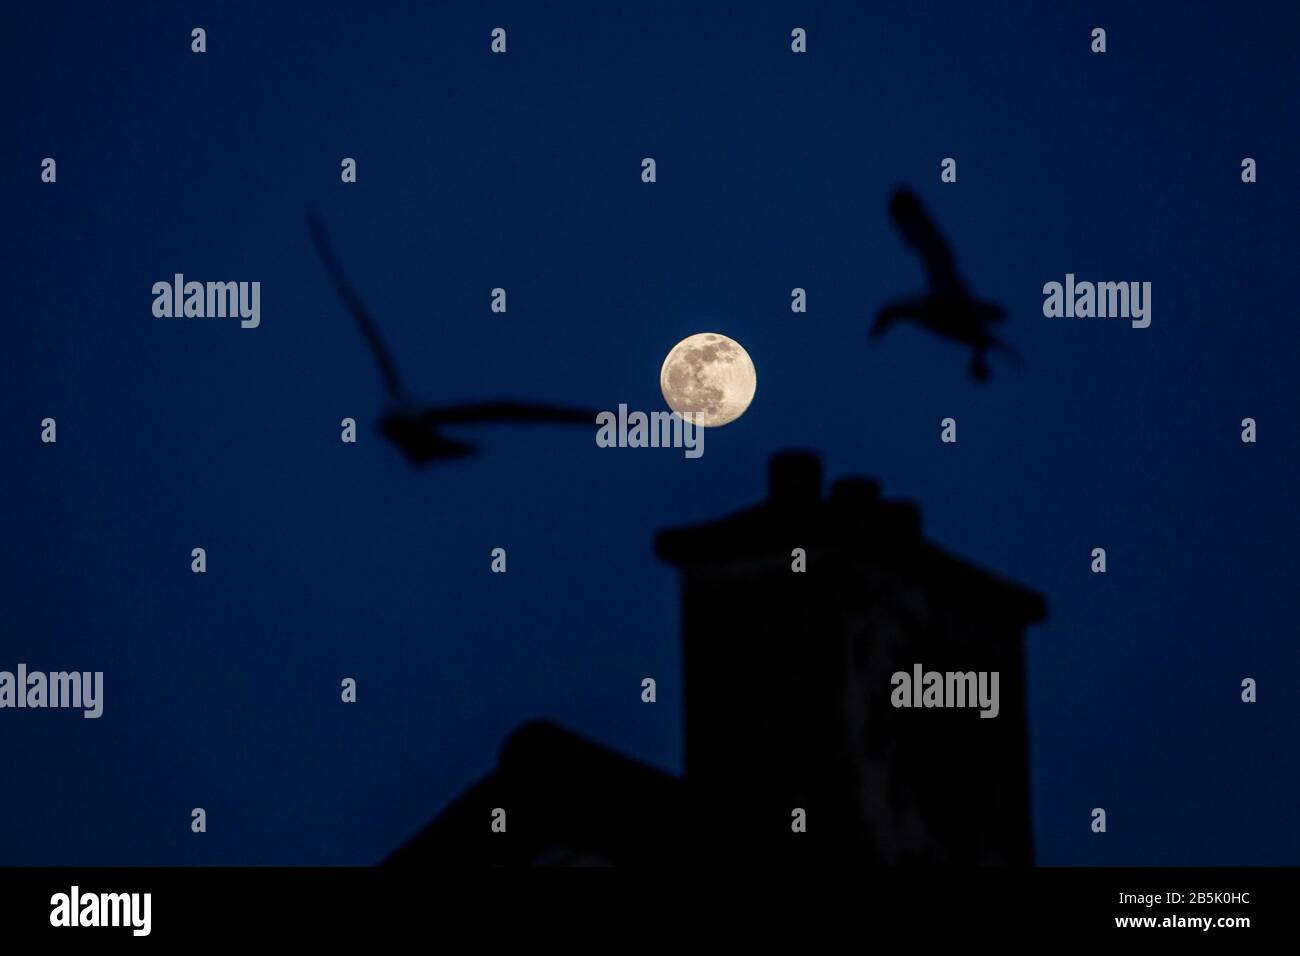 Penzance, Cornwall, UK. 8th March 2020. The Full Worm Super Moon silhouetted against the skyline  Credit: Mike Newman/Alamy Live News. Stock Photo